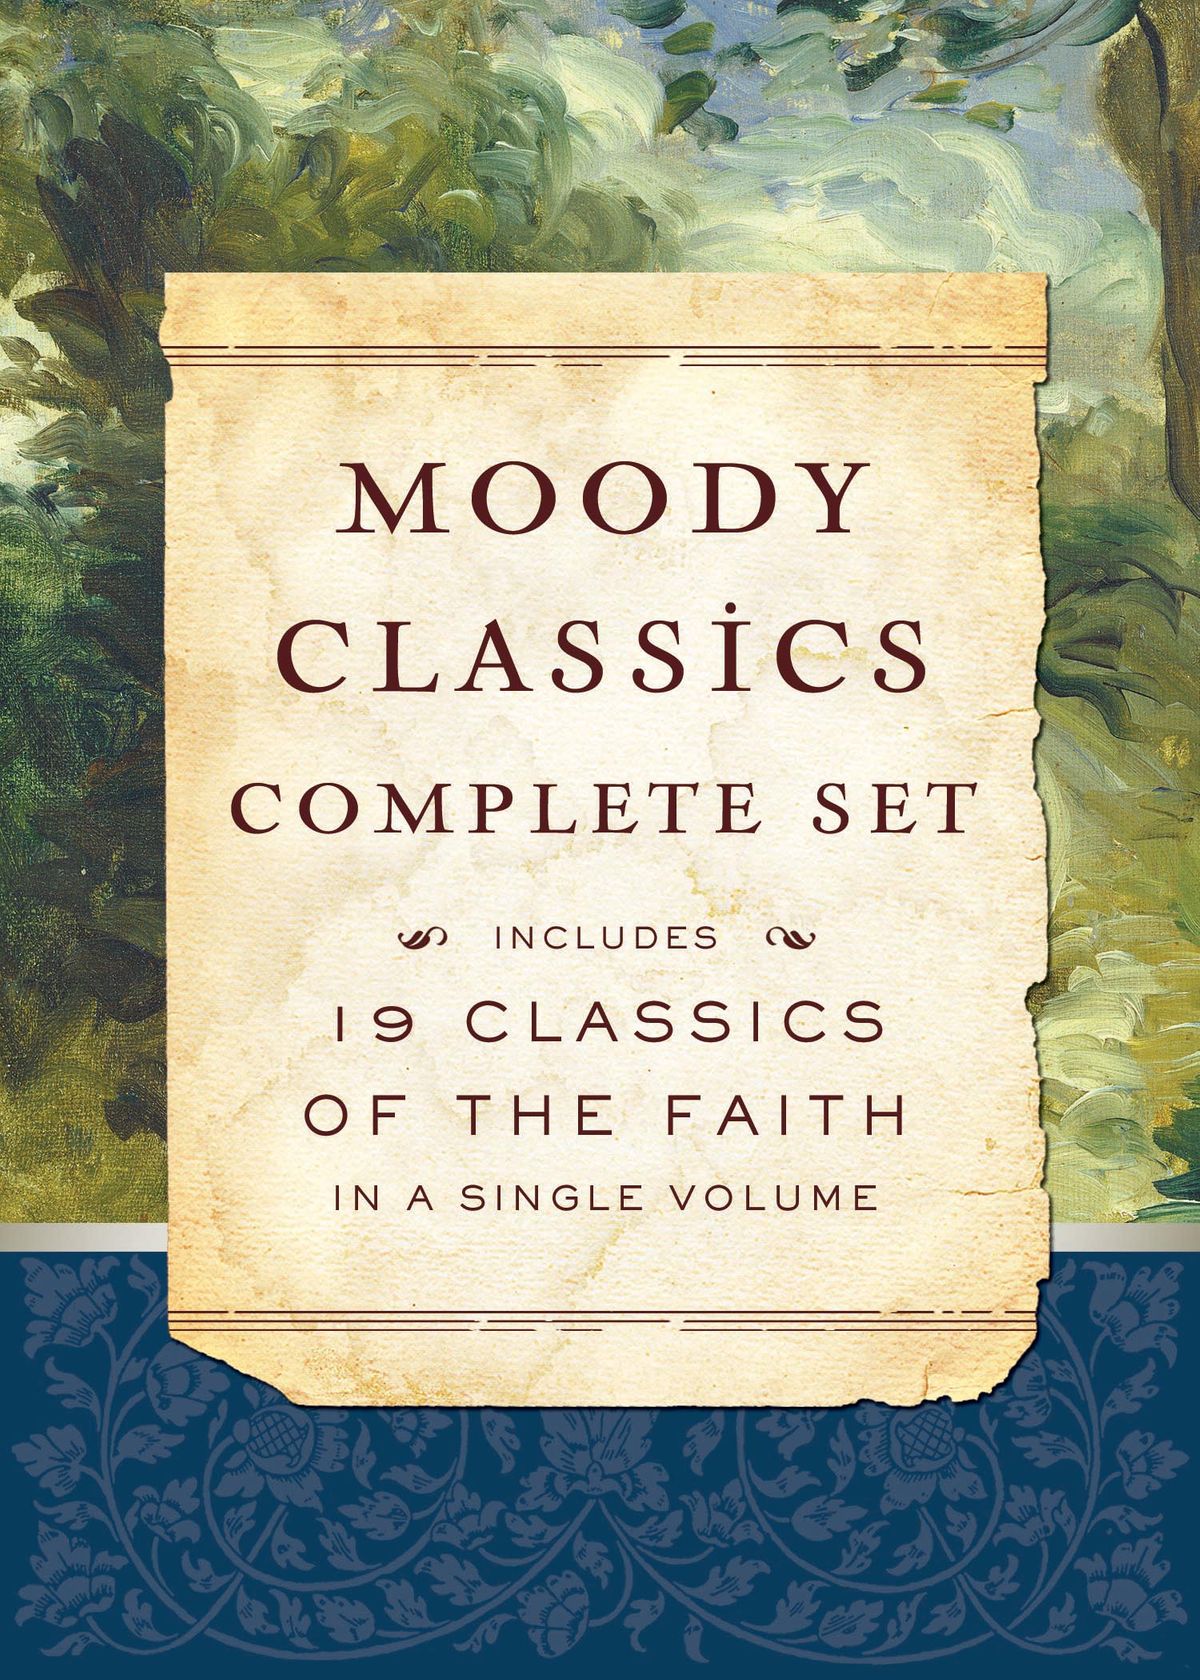 Moody Classics Complete Set: Includes 19 Classics of the Faith in a Single Volume Augustine of Hippo